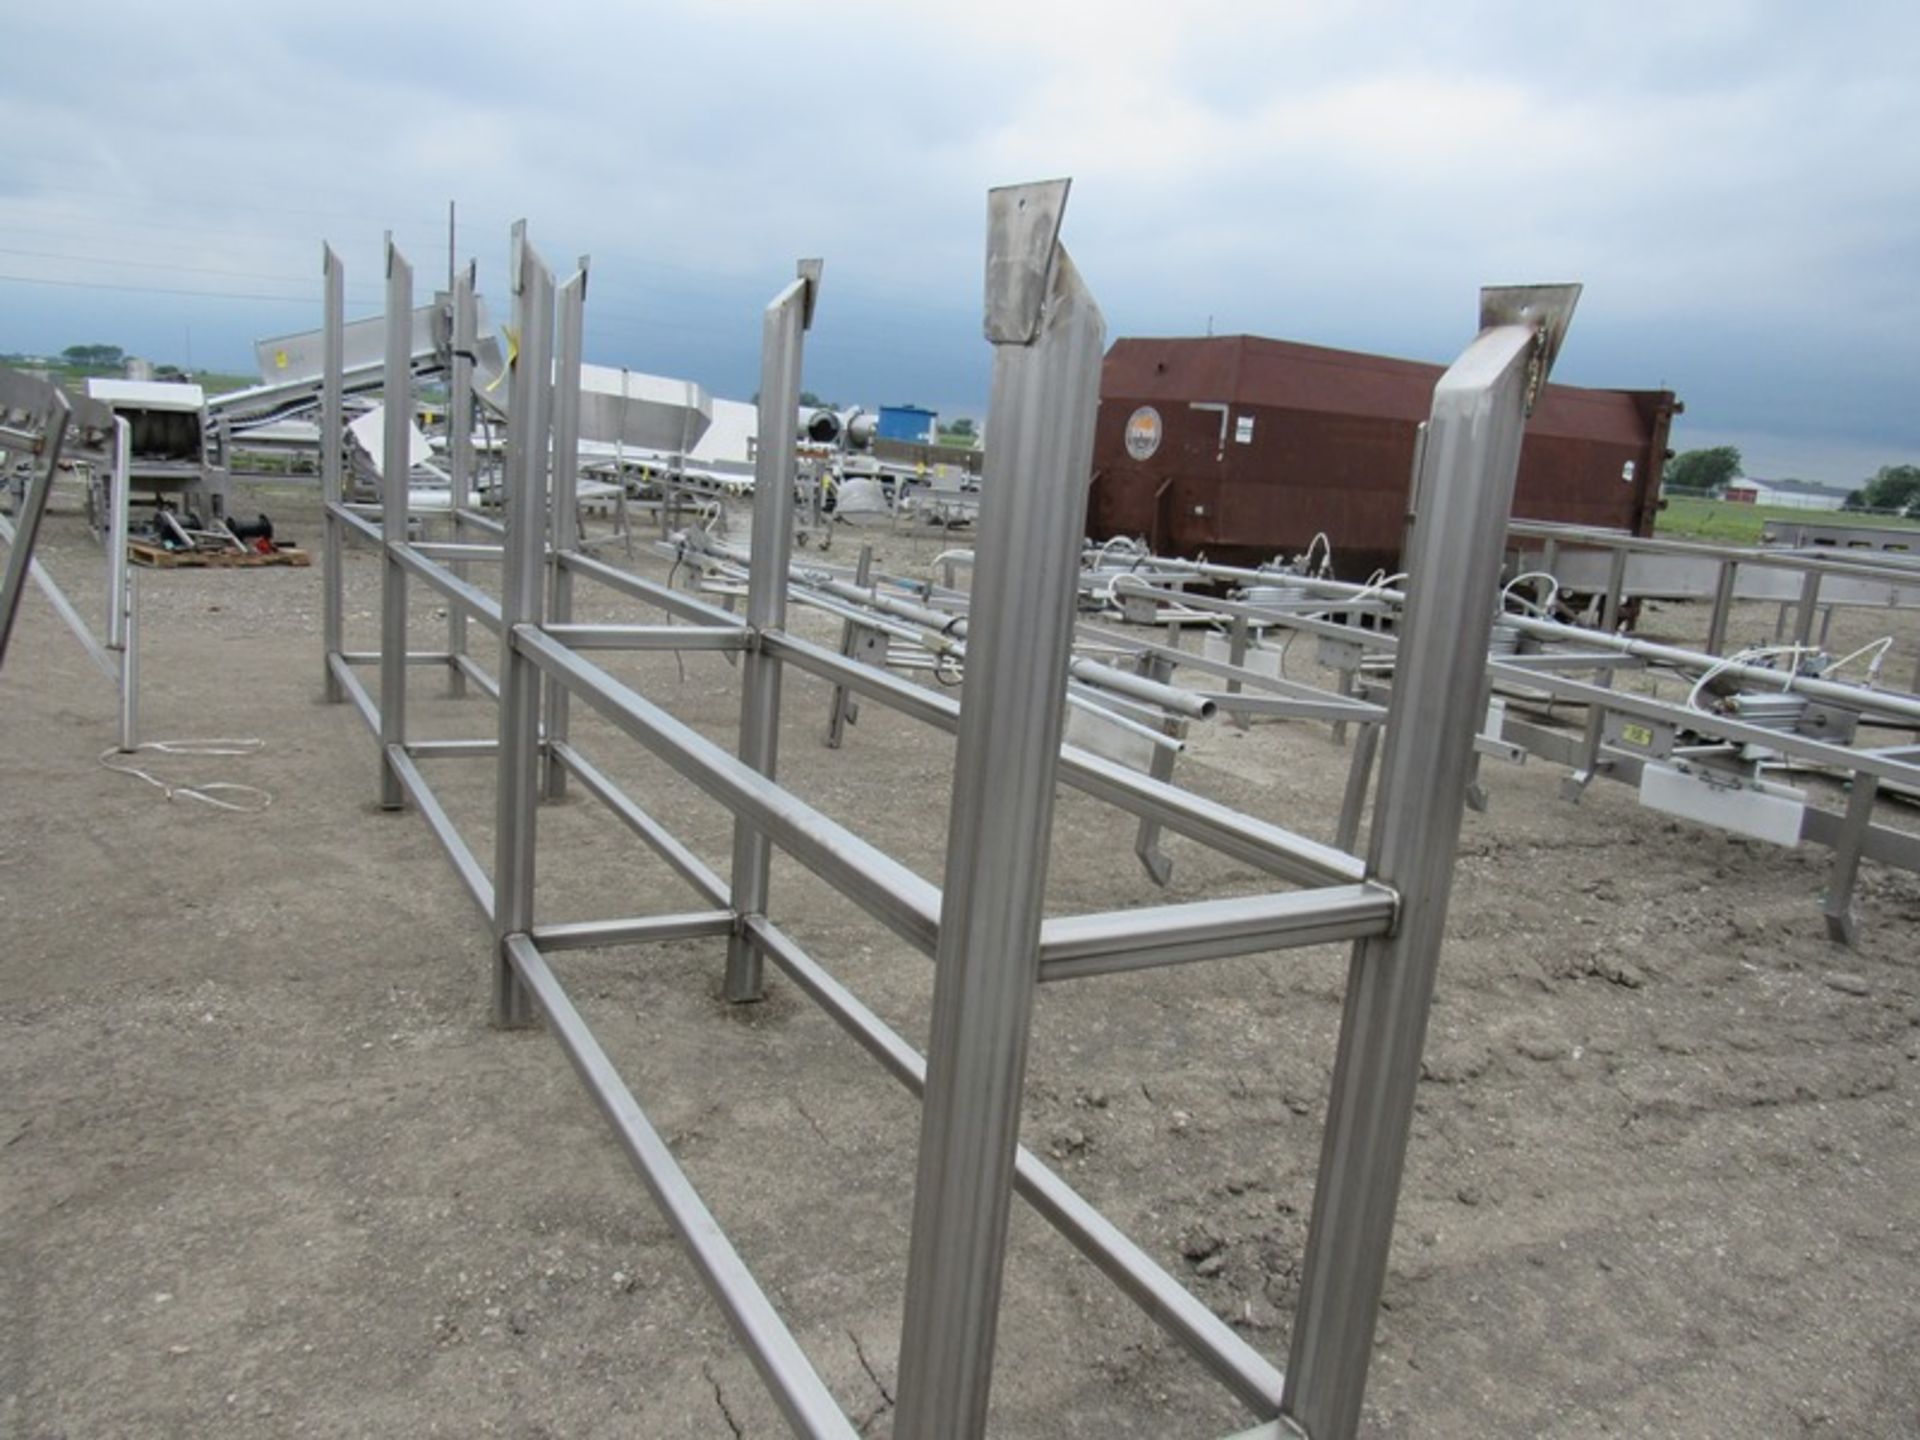 Scrap Lot, Stainless Steel Conveyor Frames, (7) pieces (Loading Fee: $250.00 - Rigger: Norm